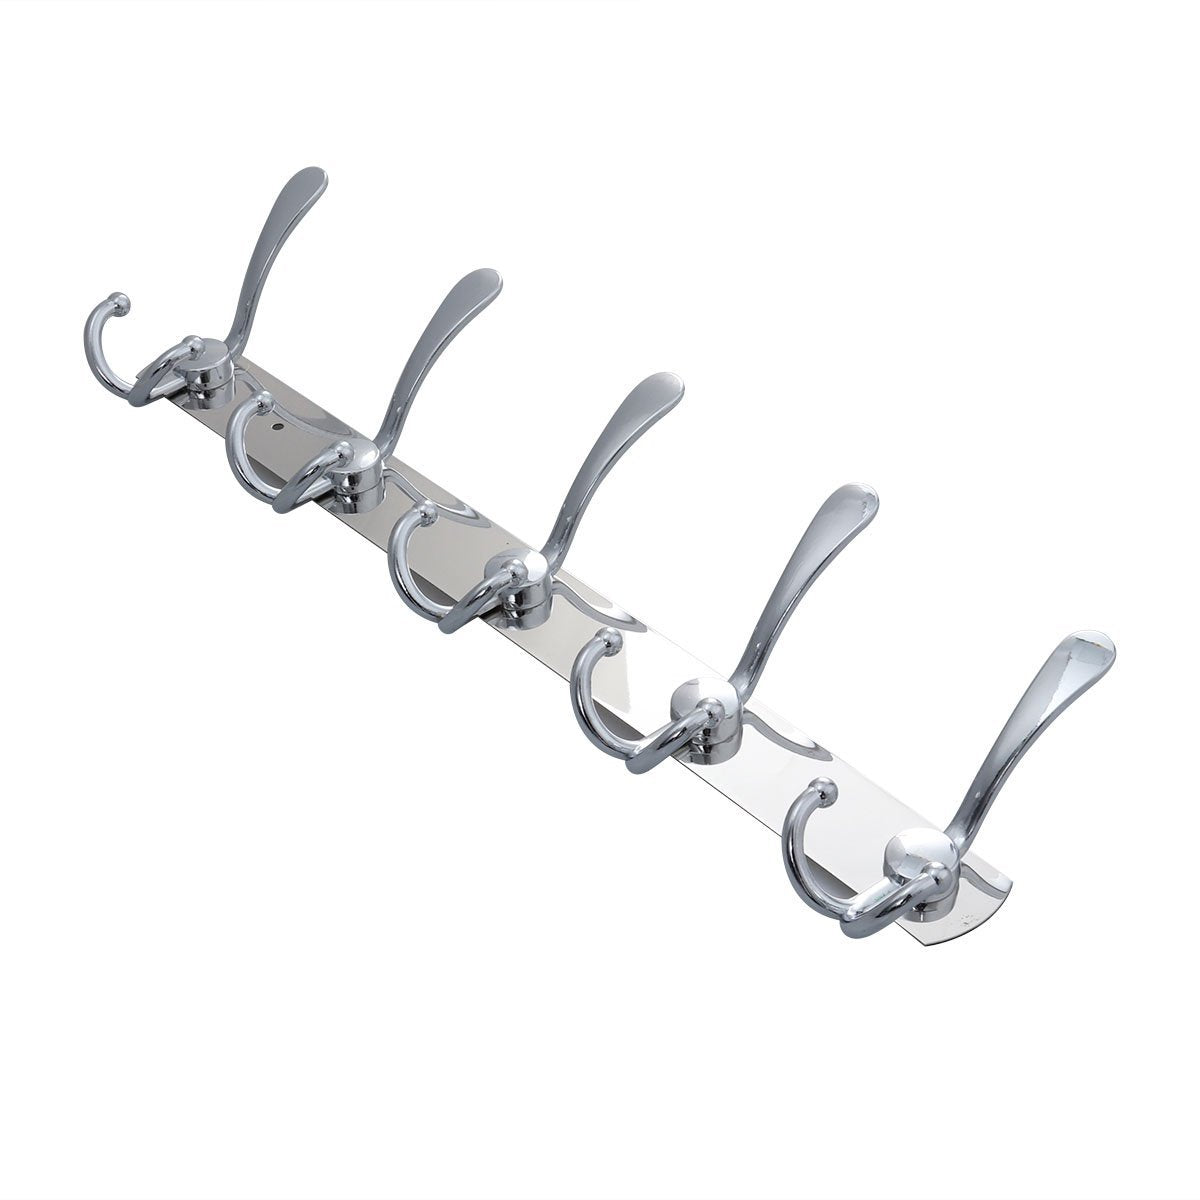 TOYMYTOY 2pcs Wall Mounted Coat Hook 2 Pack Rack with 5 Stainless Steel Hat Hanger